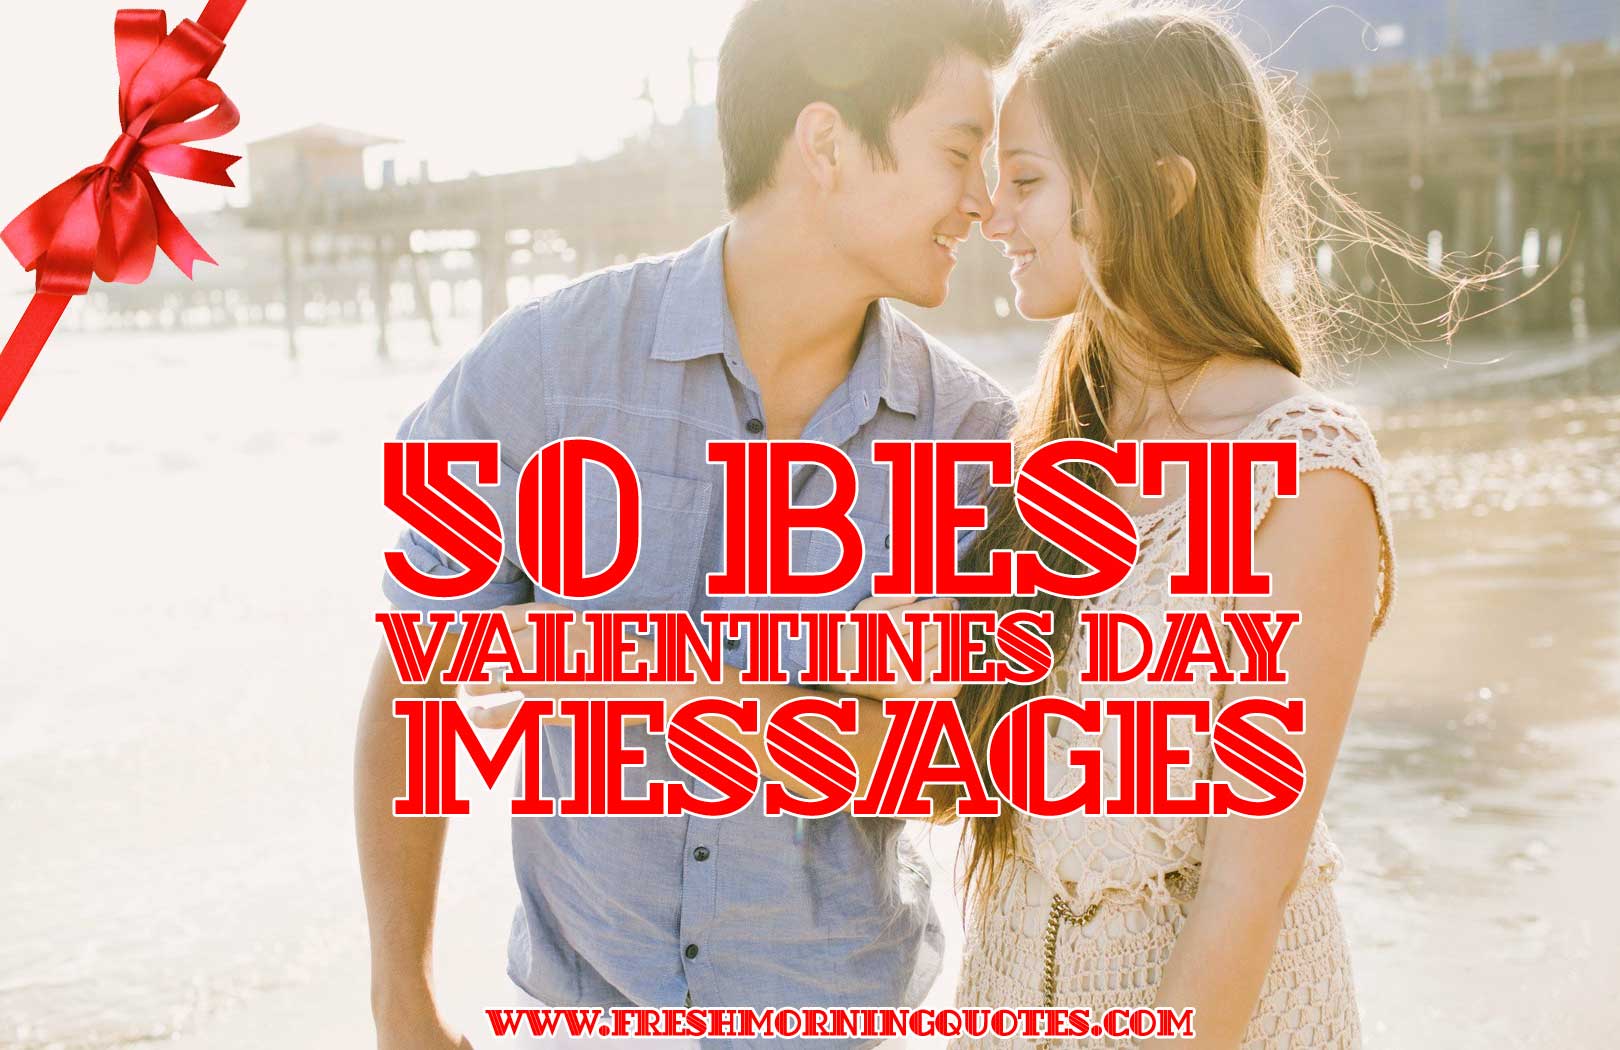 50 Best Valentines Day SMS messages - Freshmorningquotes1620 x 1050